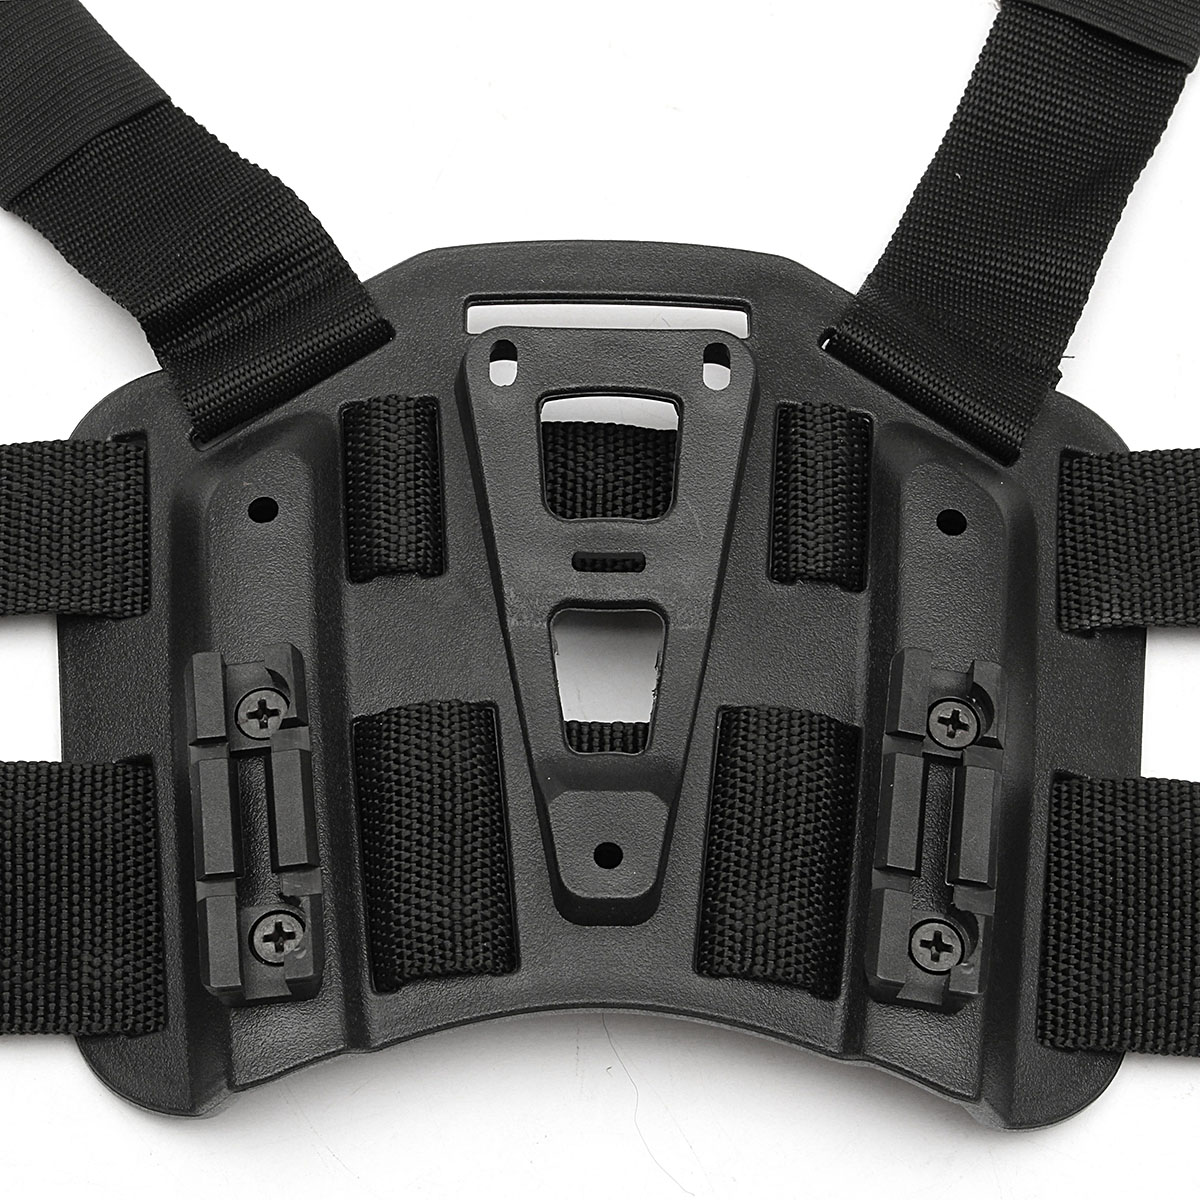 Tactical-Drop-Leg-Thigh-Rig-Holster-Platform-Panel-Plate-For-SERPA-CQC-Holsters-1243352-5